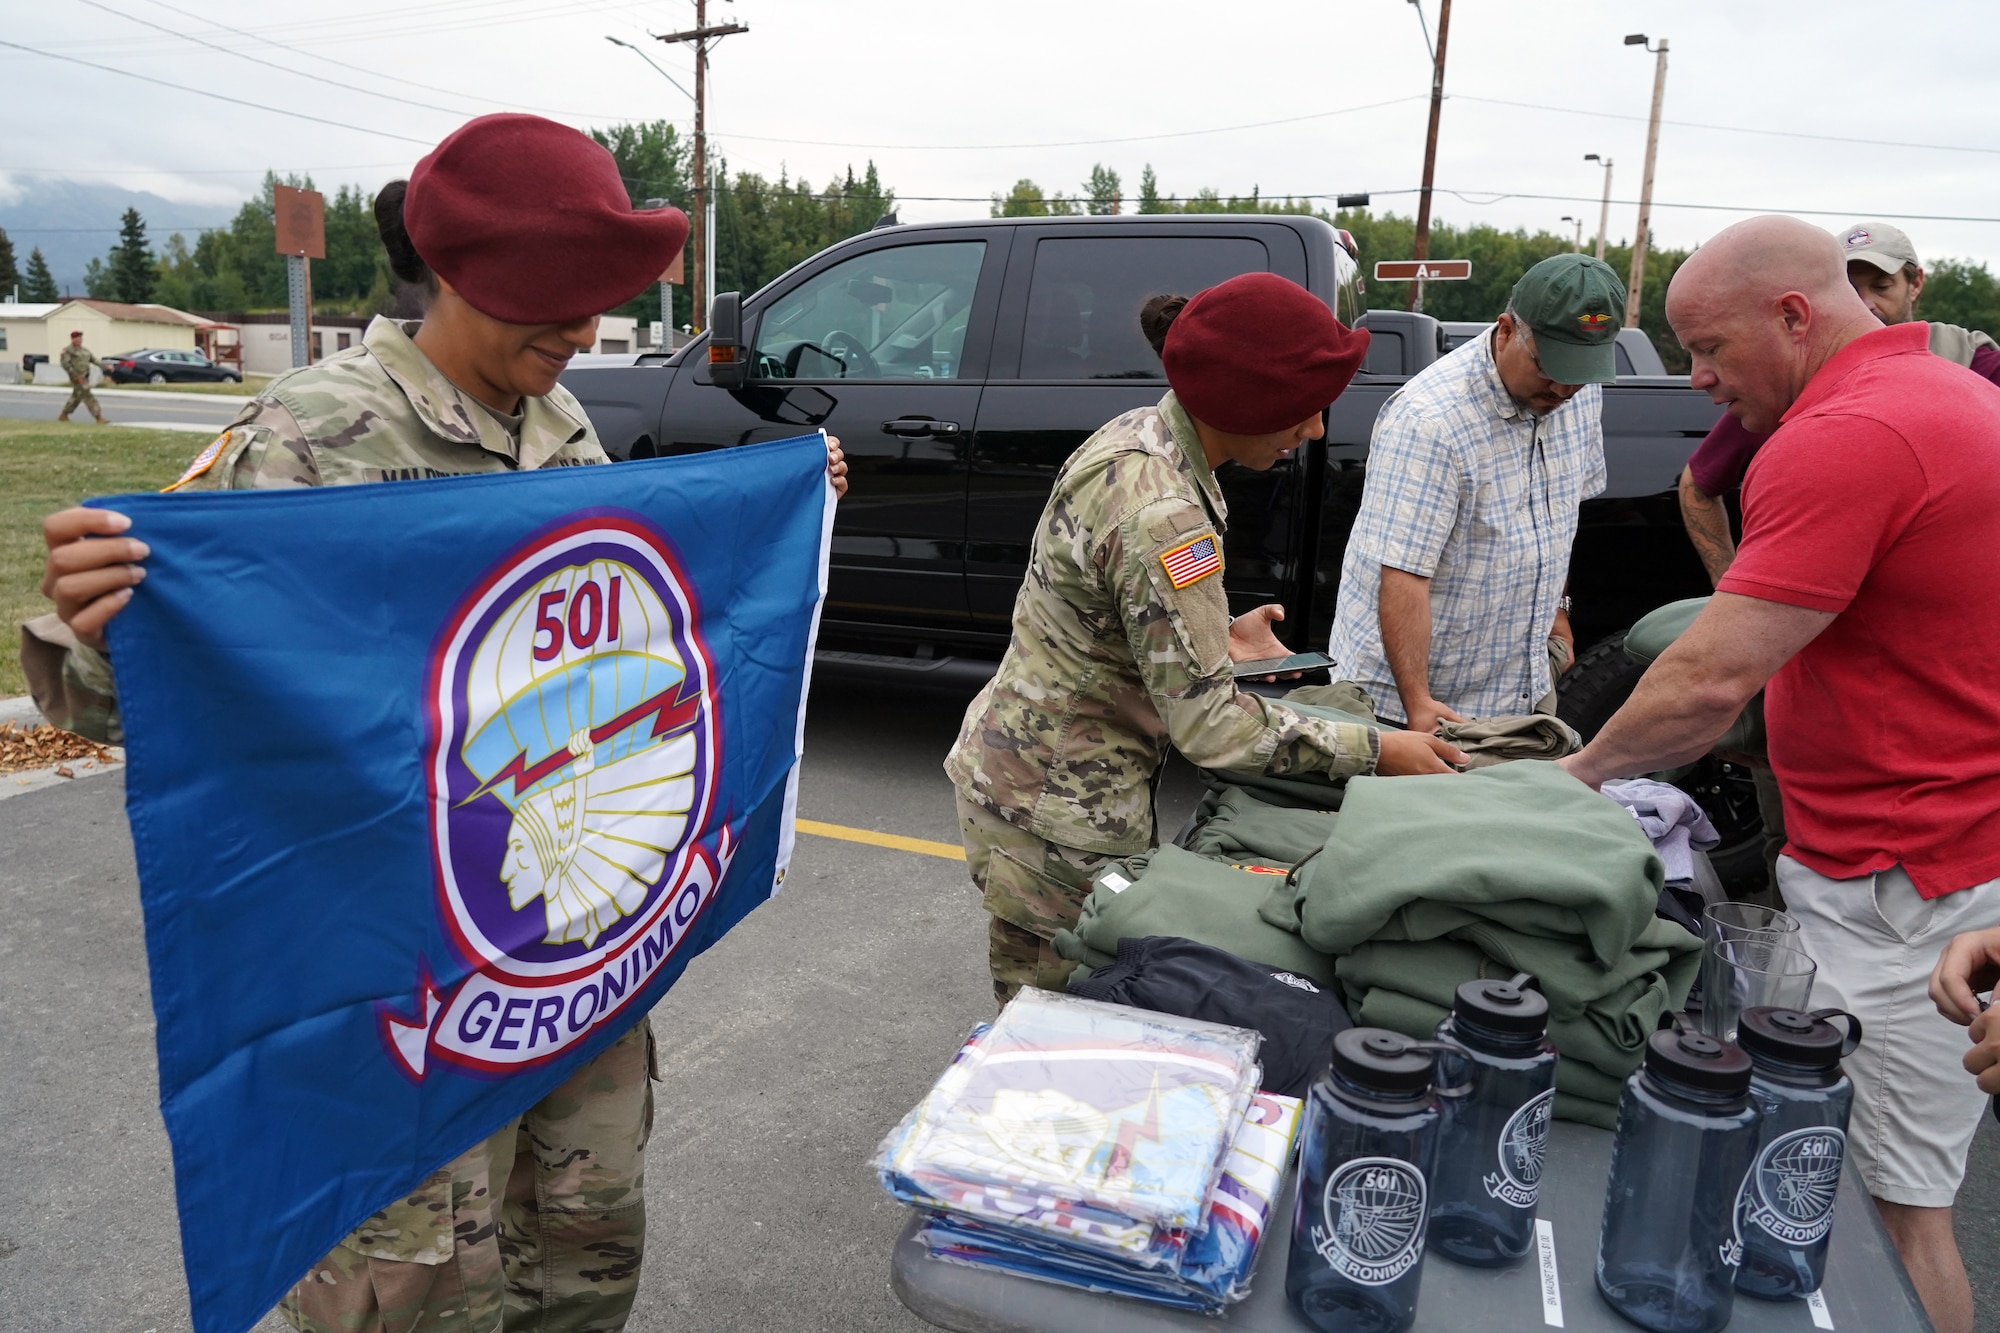 Army 1st Lt. Frances Maldonado, of San Antonio, Texas, unfolds a battalion flag as paratroopers assigned to the 1st Battalion, 501st Parachute Infantry Regiment, 4th Infantry Brigade Combat Team (Airborne), 25th Infantry Division, U.S. Army Alaska, veterans of the unit, dependents, and honored guests gather for 'Geronimo Week' festivities on Joint Base Elmendorf-Richardson, Alaska, Aug. 14, 2019, celebrating the unit's lineage. The regiment was activated on Nov. 15, 1942, at Camp Toccoa, Ga., served with distinction in World War II, the Cold War, Vietnam, as well as the Global War on Terror and continues to uphold the high standards expected of an airborne unit in peacetime duties and on the field of battle.